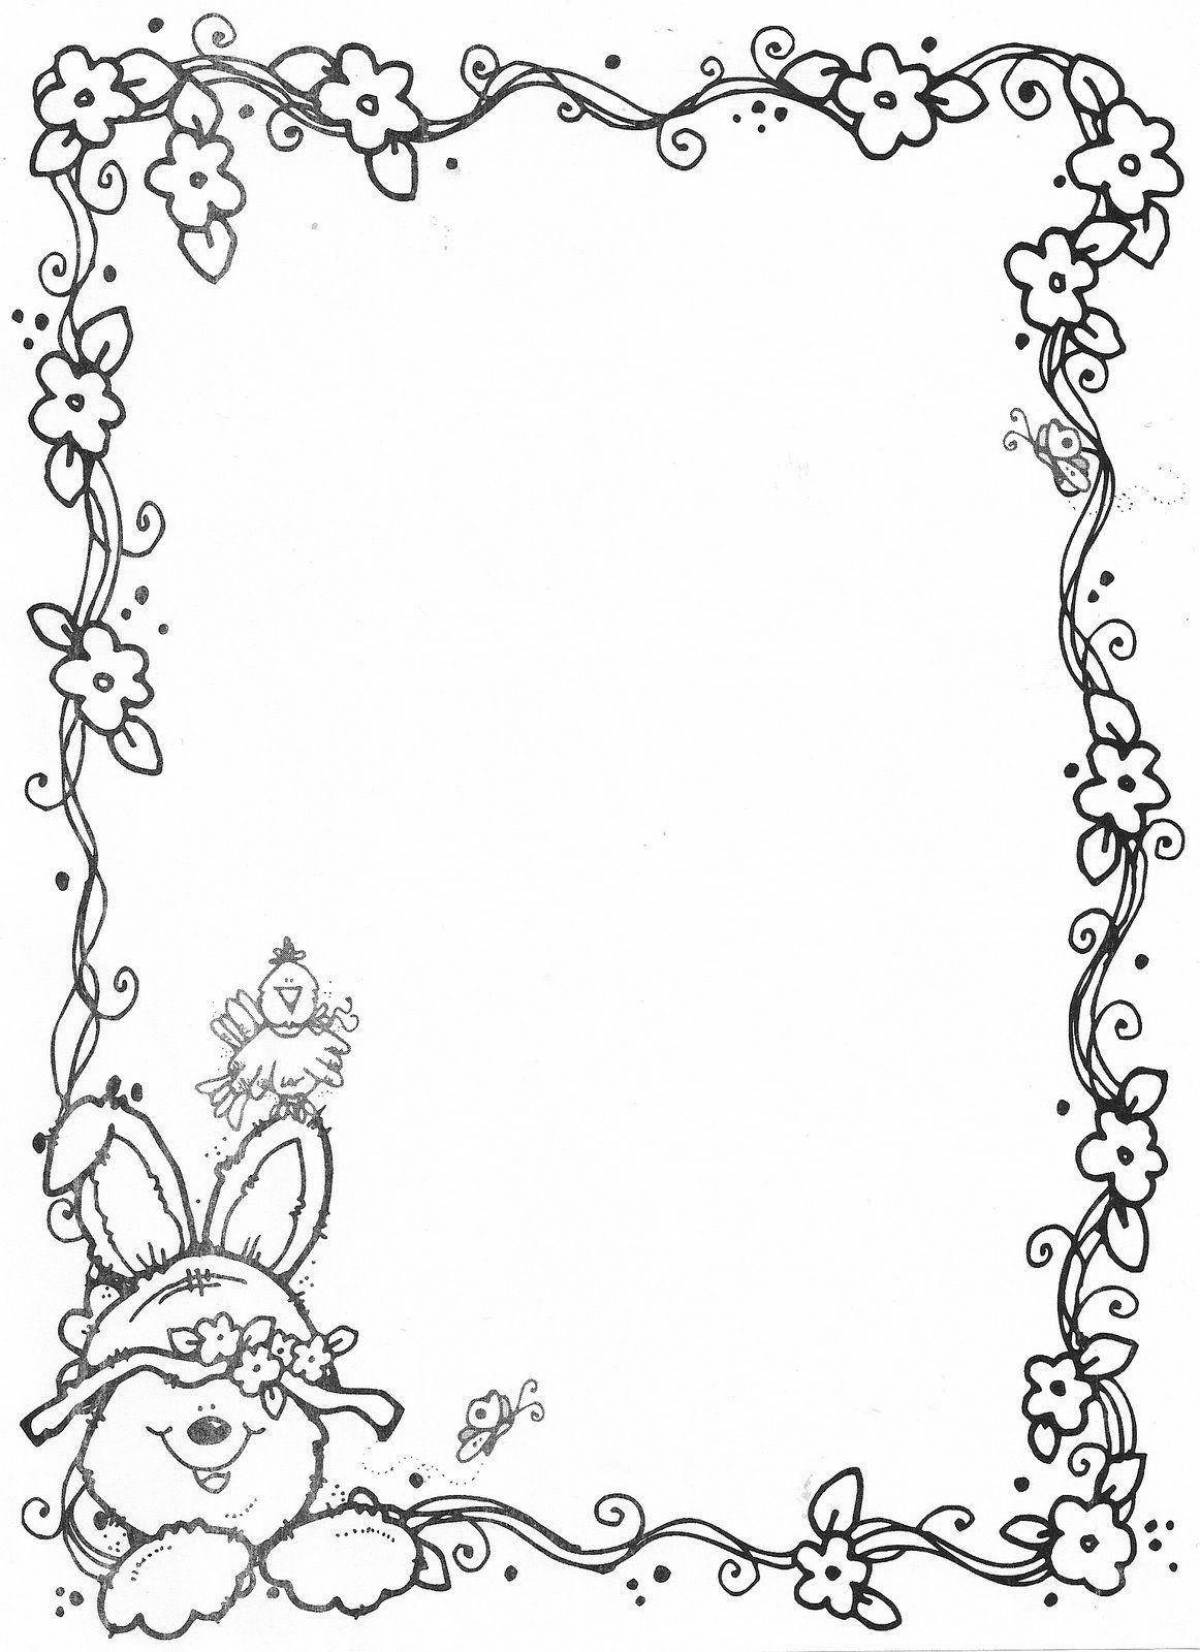 Glossy coloring frame